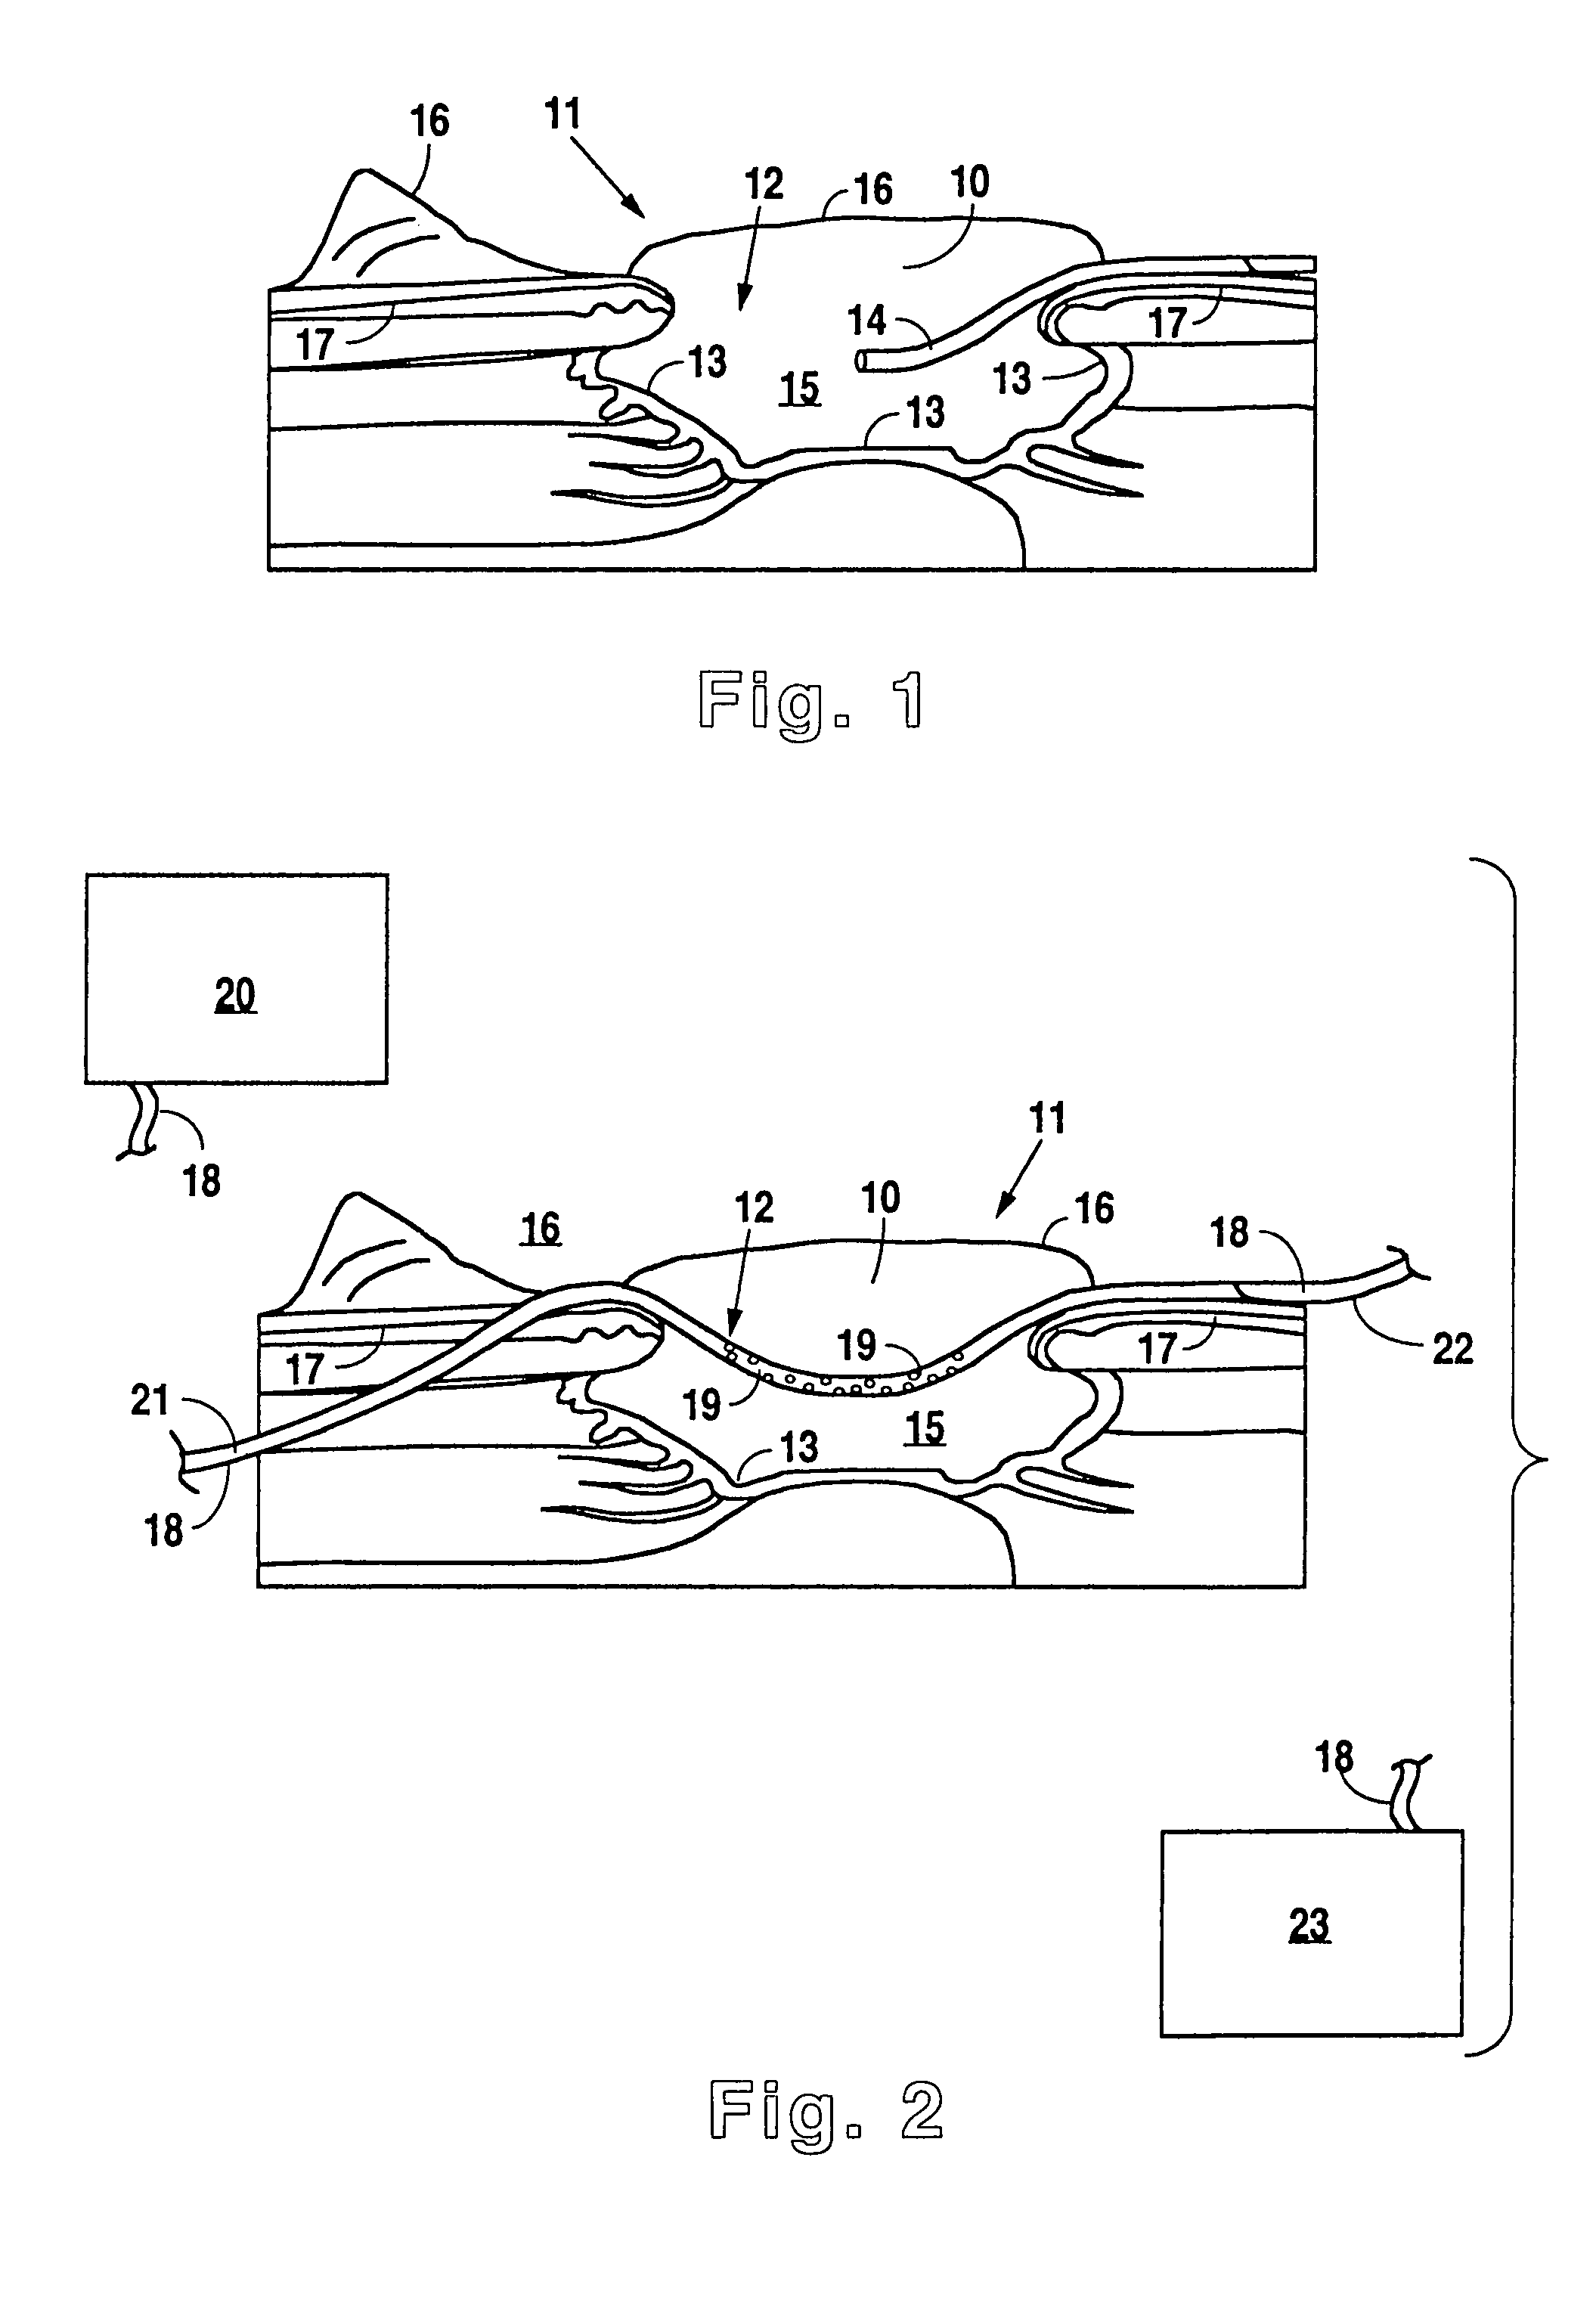 Method and apparatus for wound treatment